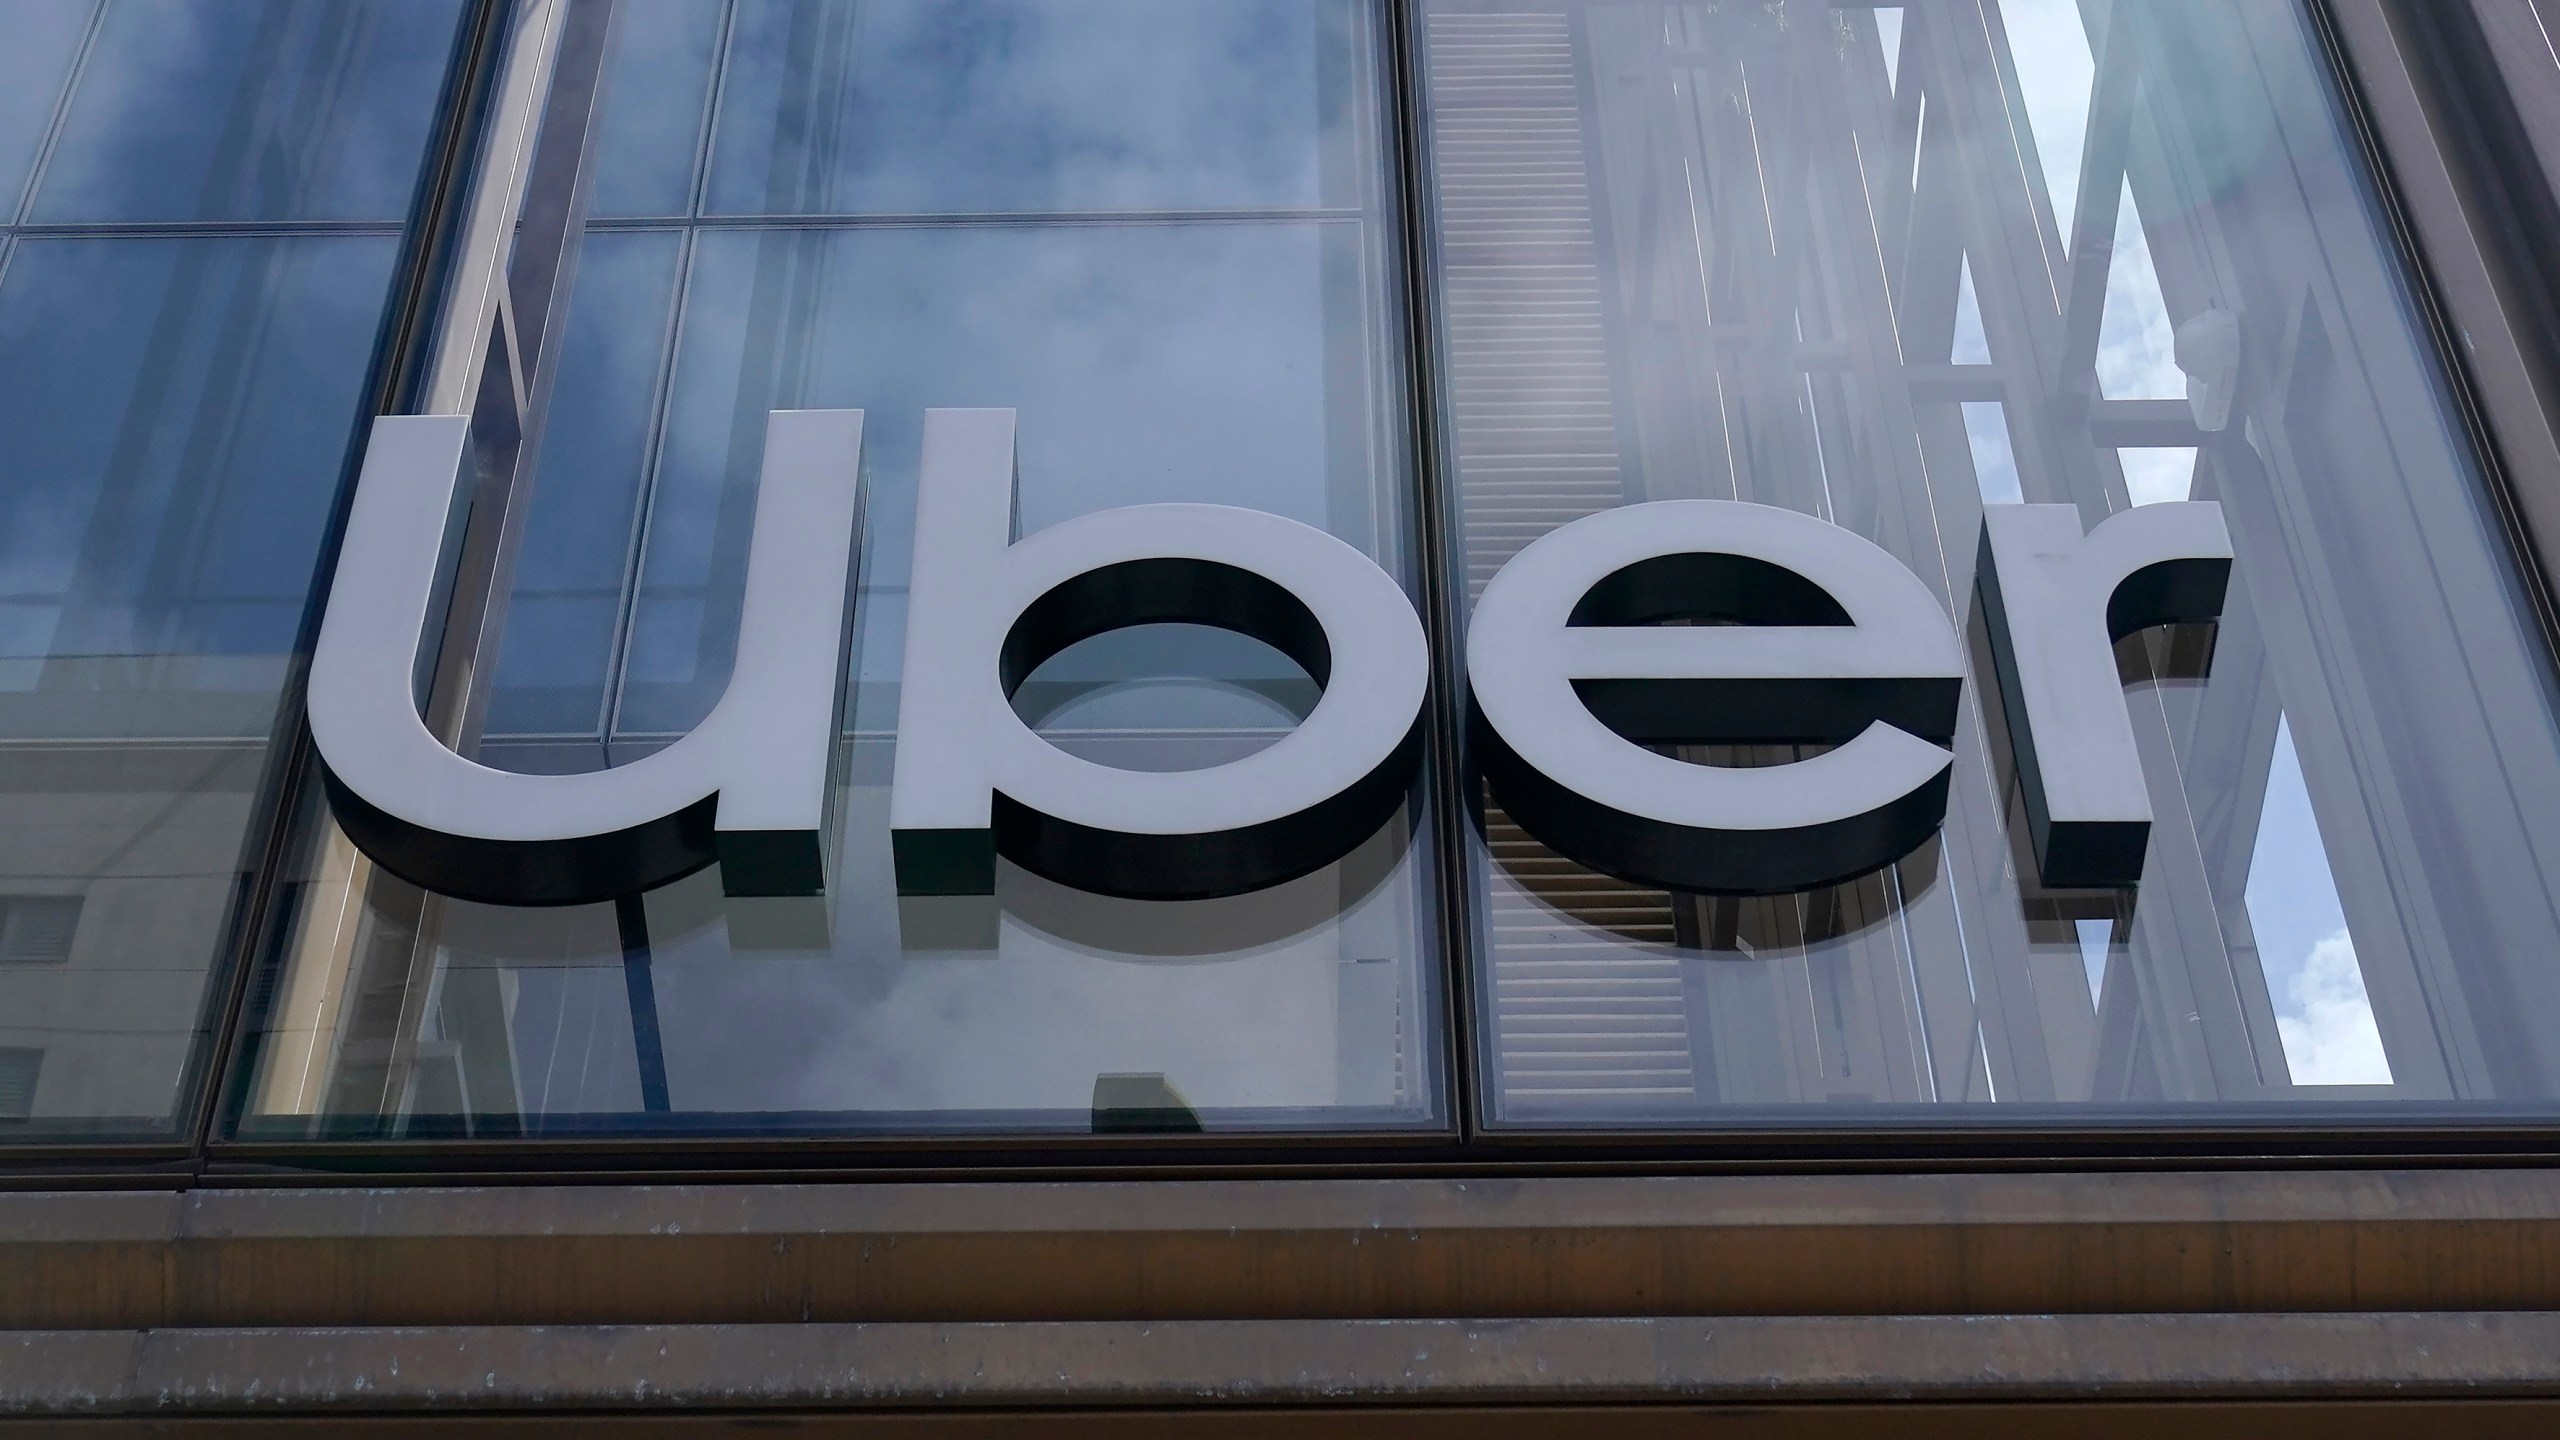 FILE - An Uber sign is displayed at the company's headquarters in San Francisco, Sept. 12, 2022. A failed Australian taxi industry disruptor has on Tuesday, April 2, 2024, begun its law suit against Uber claiming the U.S. giant began illegally operating ride sharing in Australia to gain an unfair advantage over competitors. (AP Photo/Jeff Chiu, File)